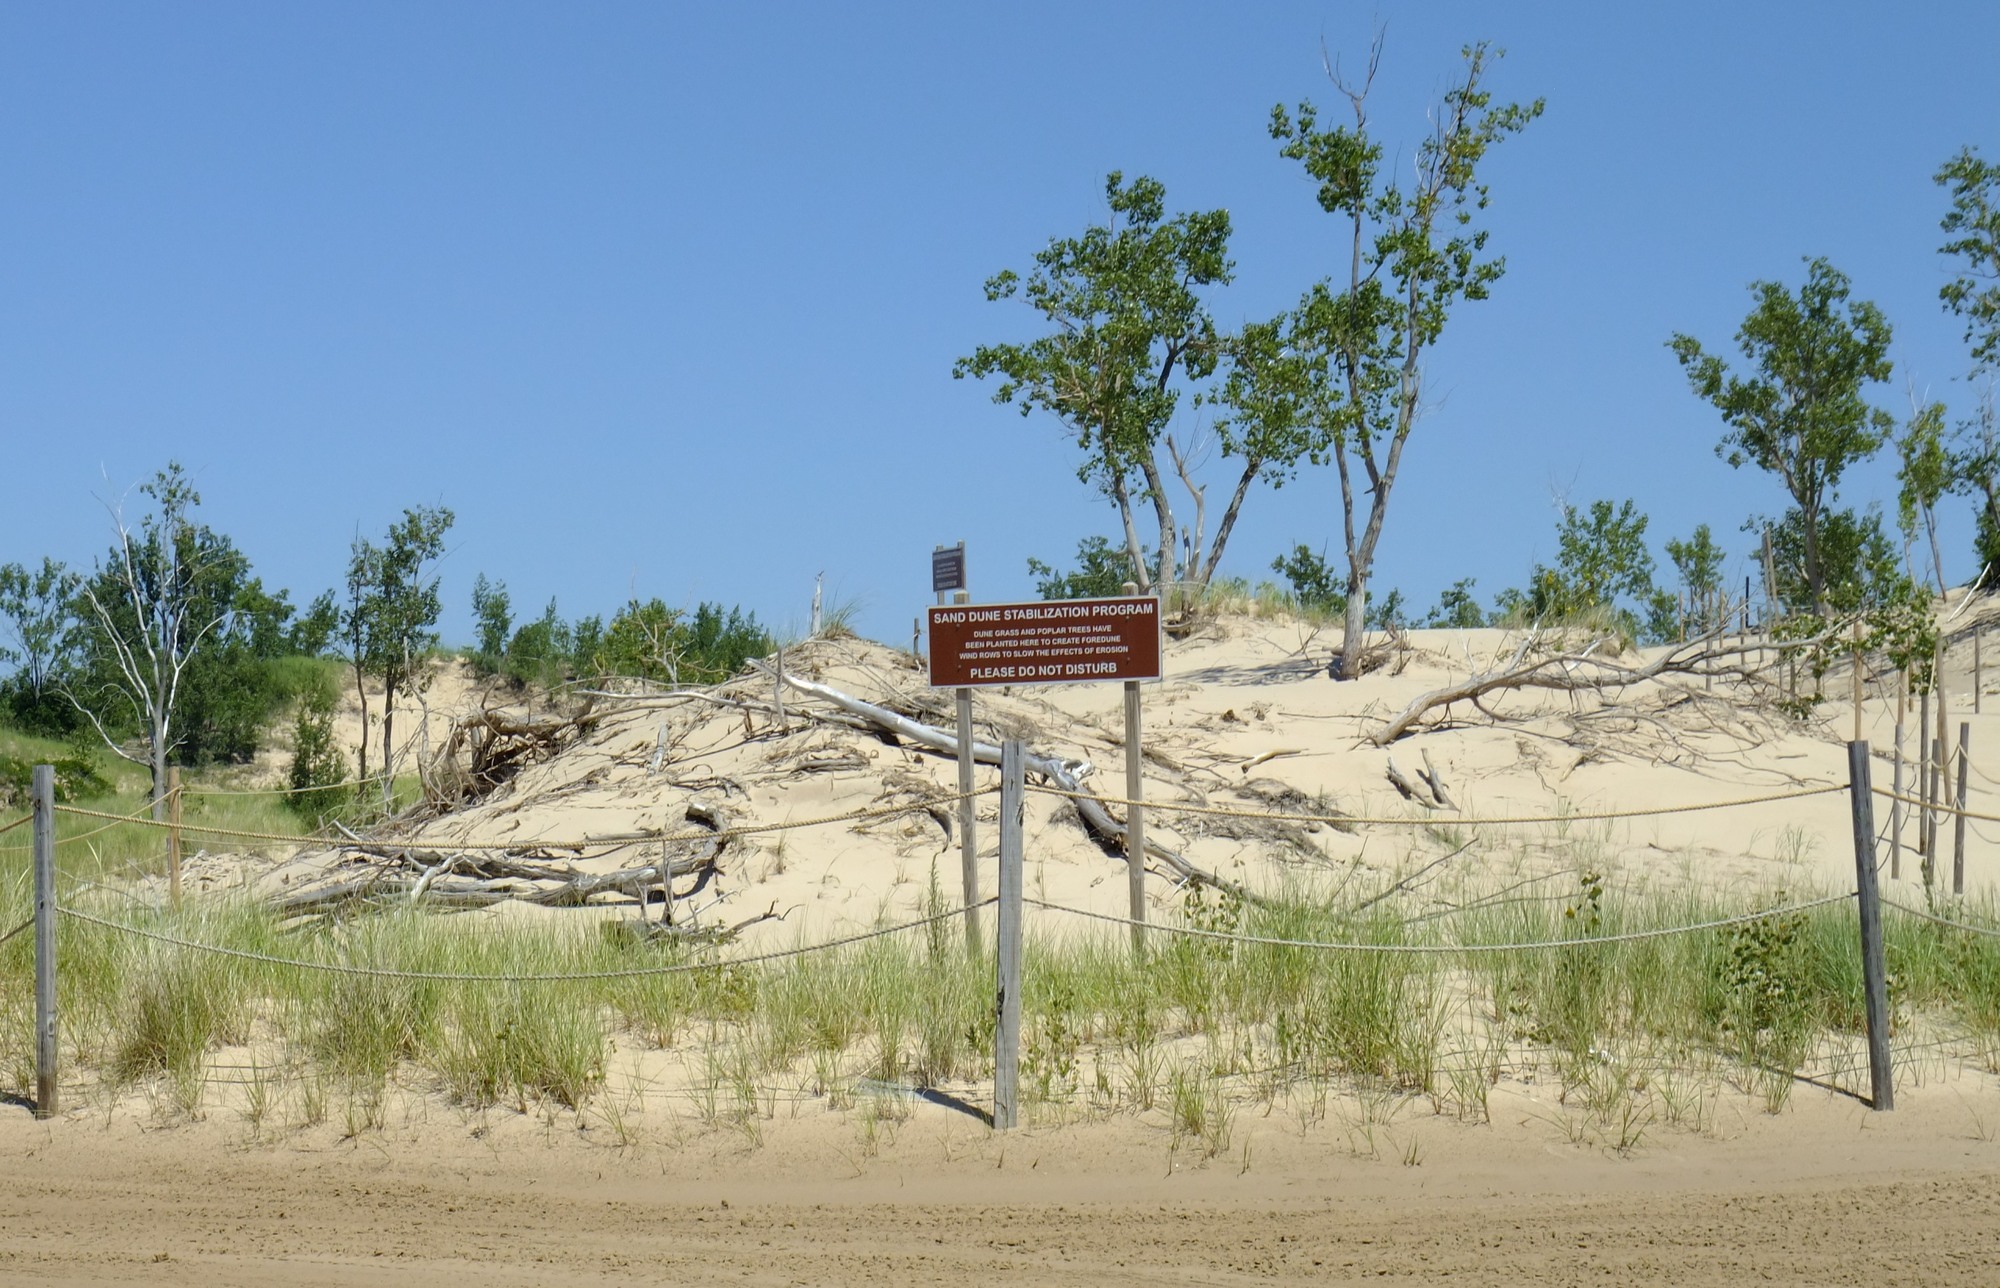 A dune restoration project at Silver Lake State Park in Oceana County was among more than a dozen off-road vehicle-related improvements made recently.